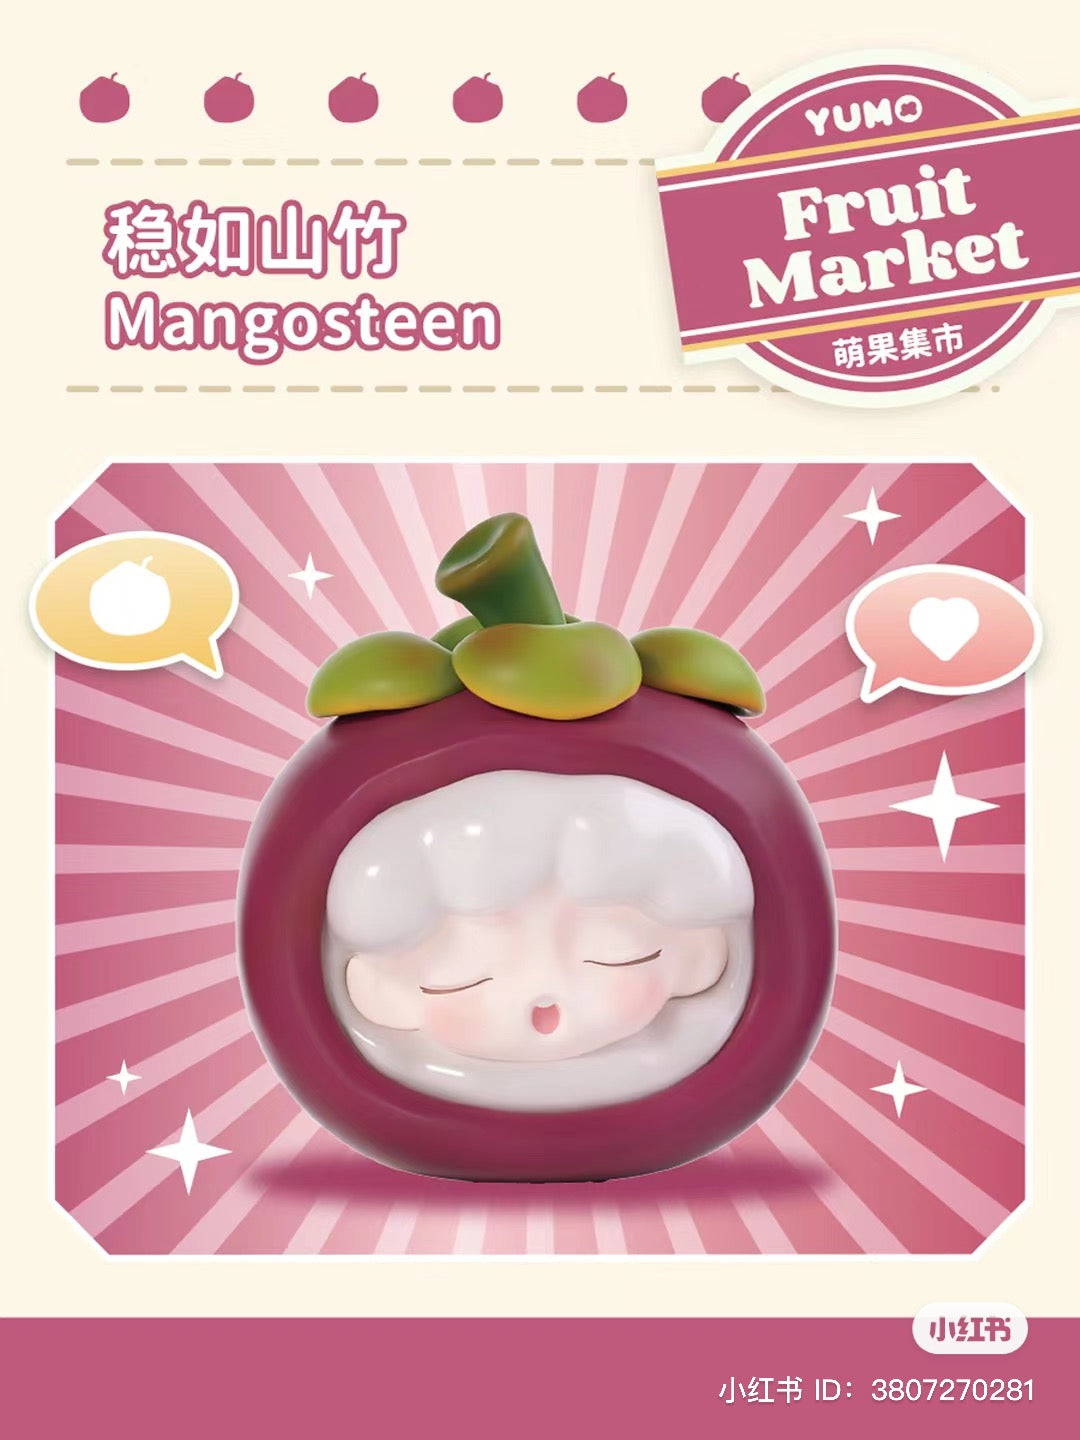 A blind box series from Strangecat Toys: Yumo Fruit Market Blind Box Series. Includes 12 regular designs and 1 secret toy. Each Blind Box Contains 2 Different Toy Designs.